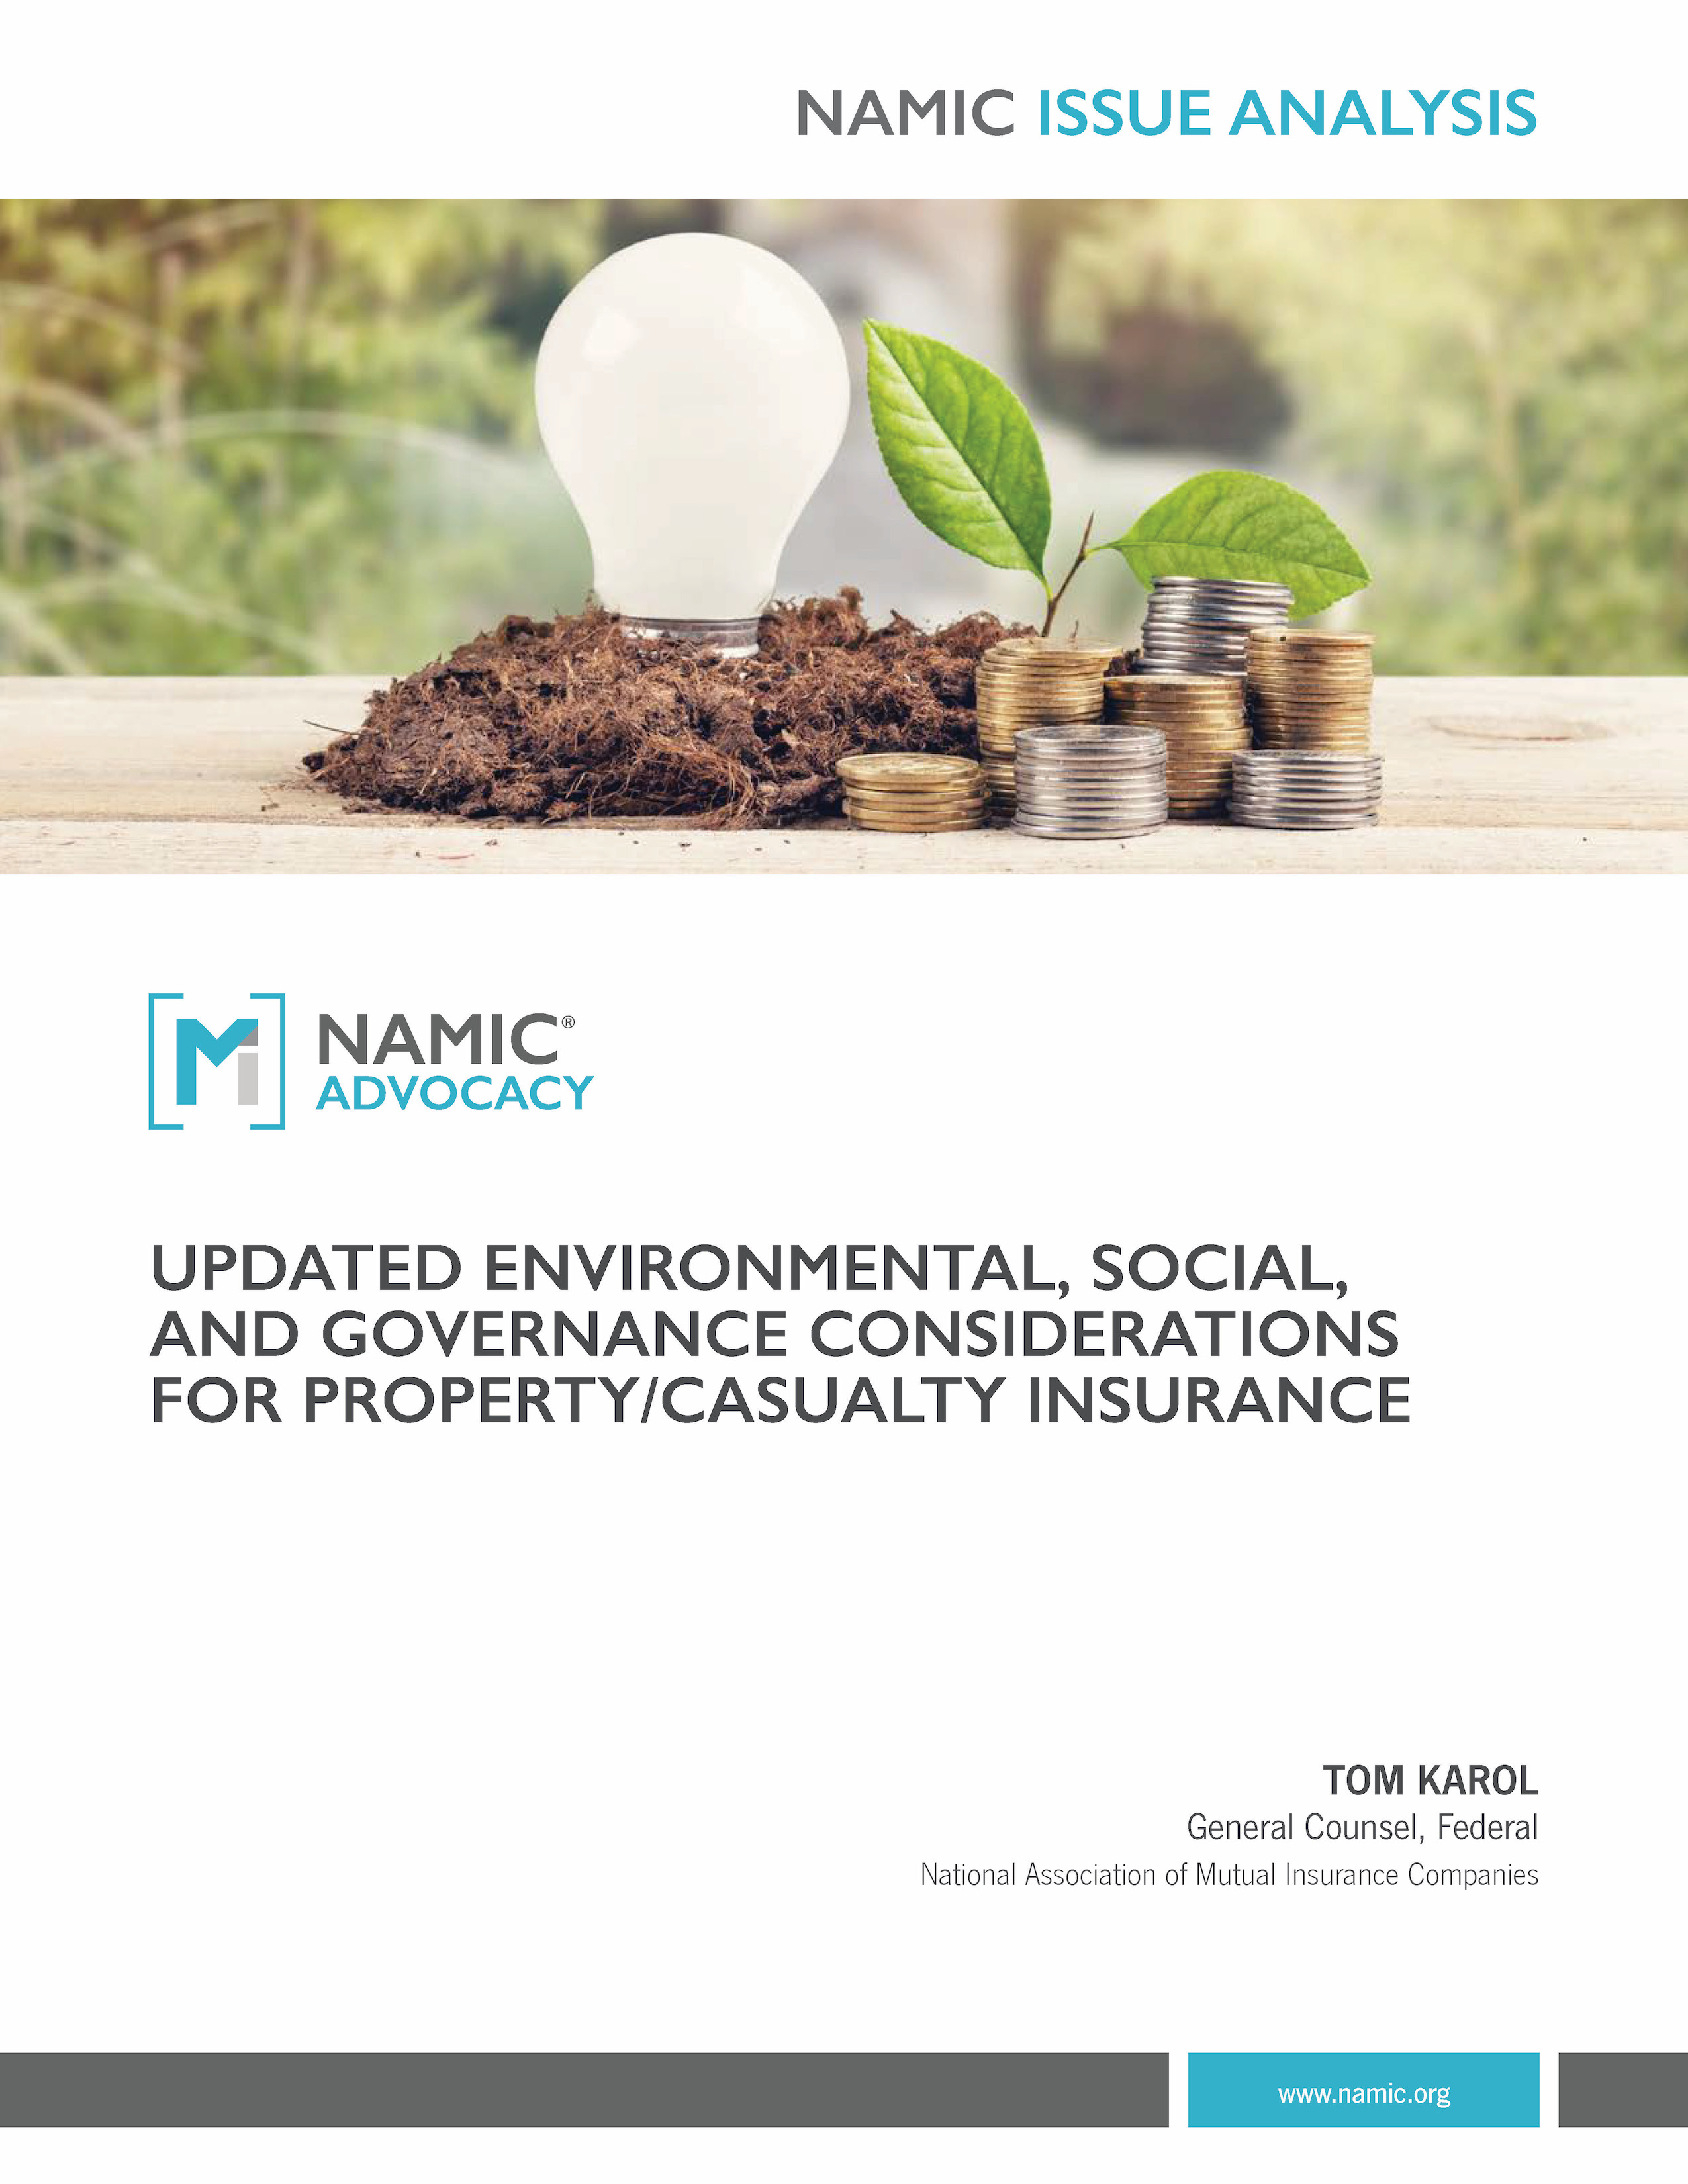 Updated Environmental, Social, and Governance Considerations for Property/Casualty Insurance PDF